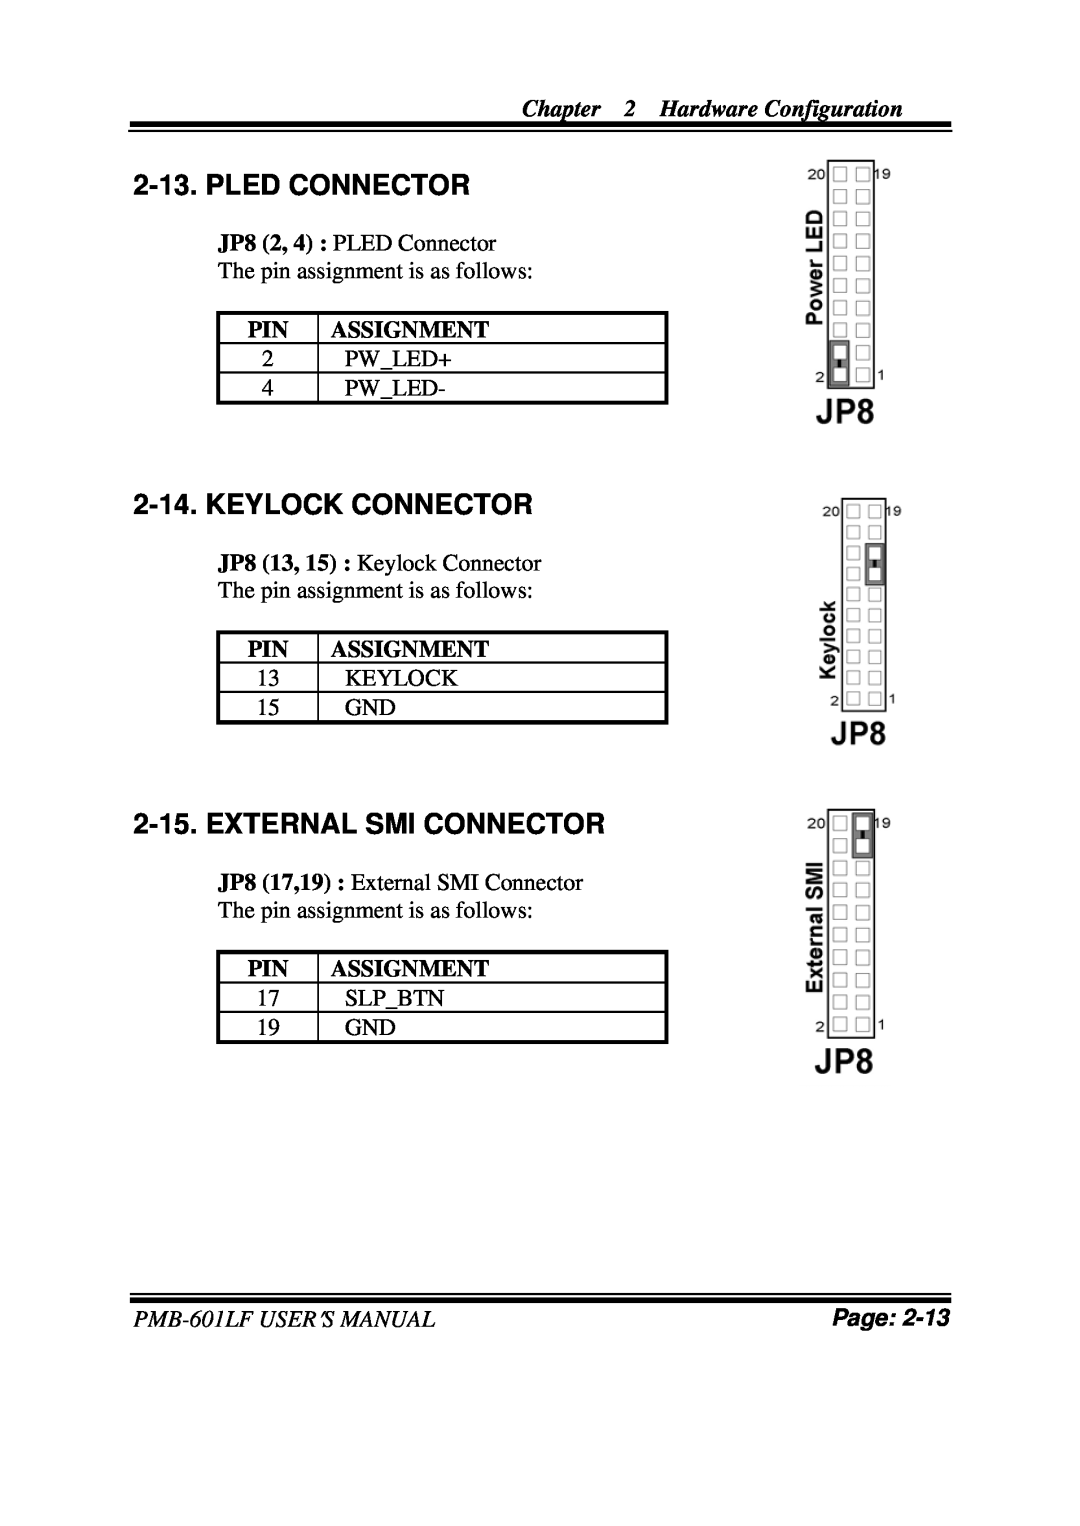 Intel PMB-601LF Pled Connector, Keylock Connector, External Smi Connector, Hardware Configuration, Pin Assignment, Page 